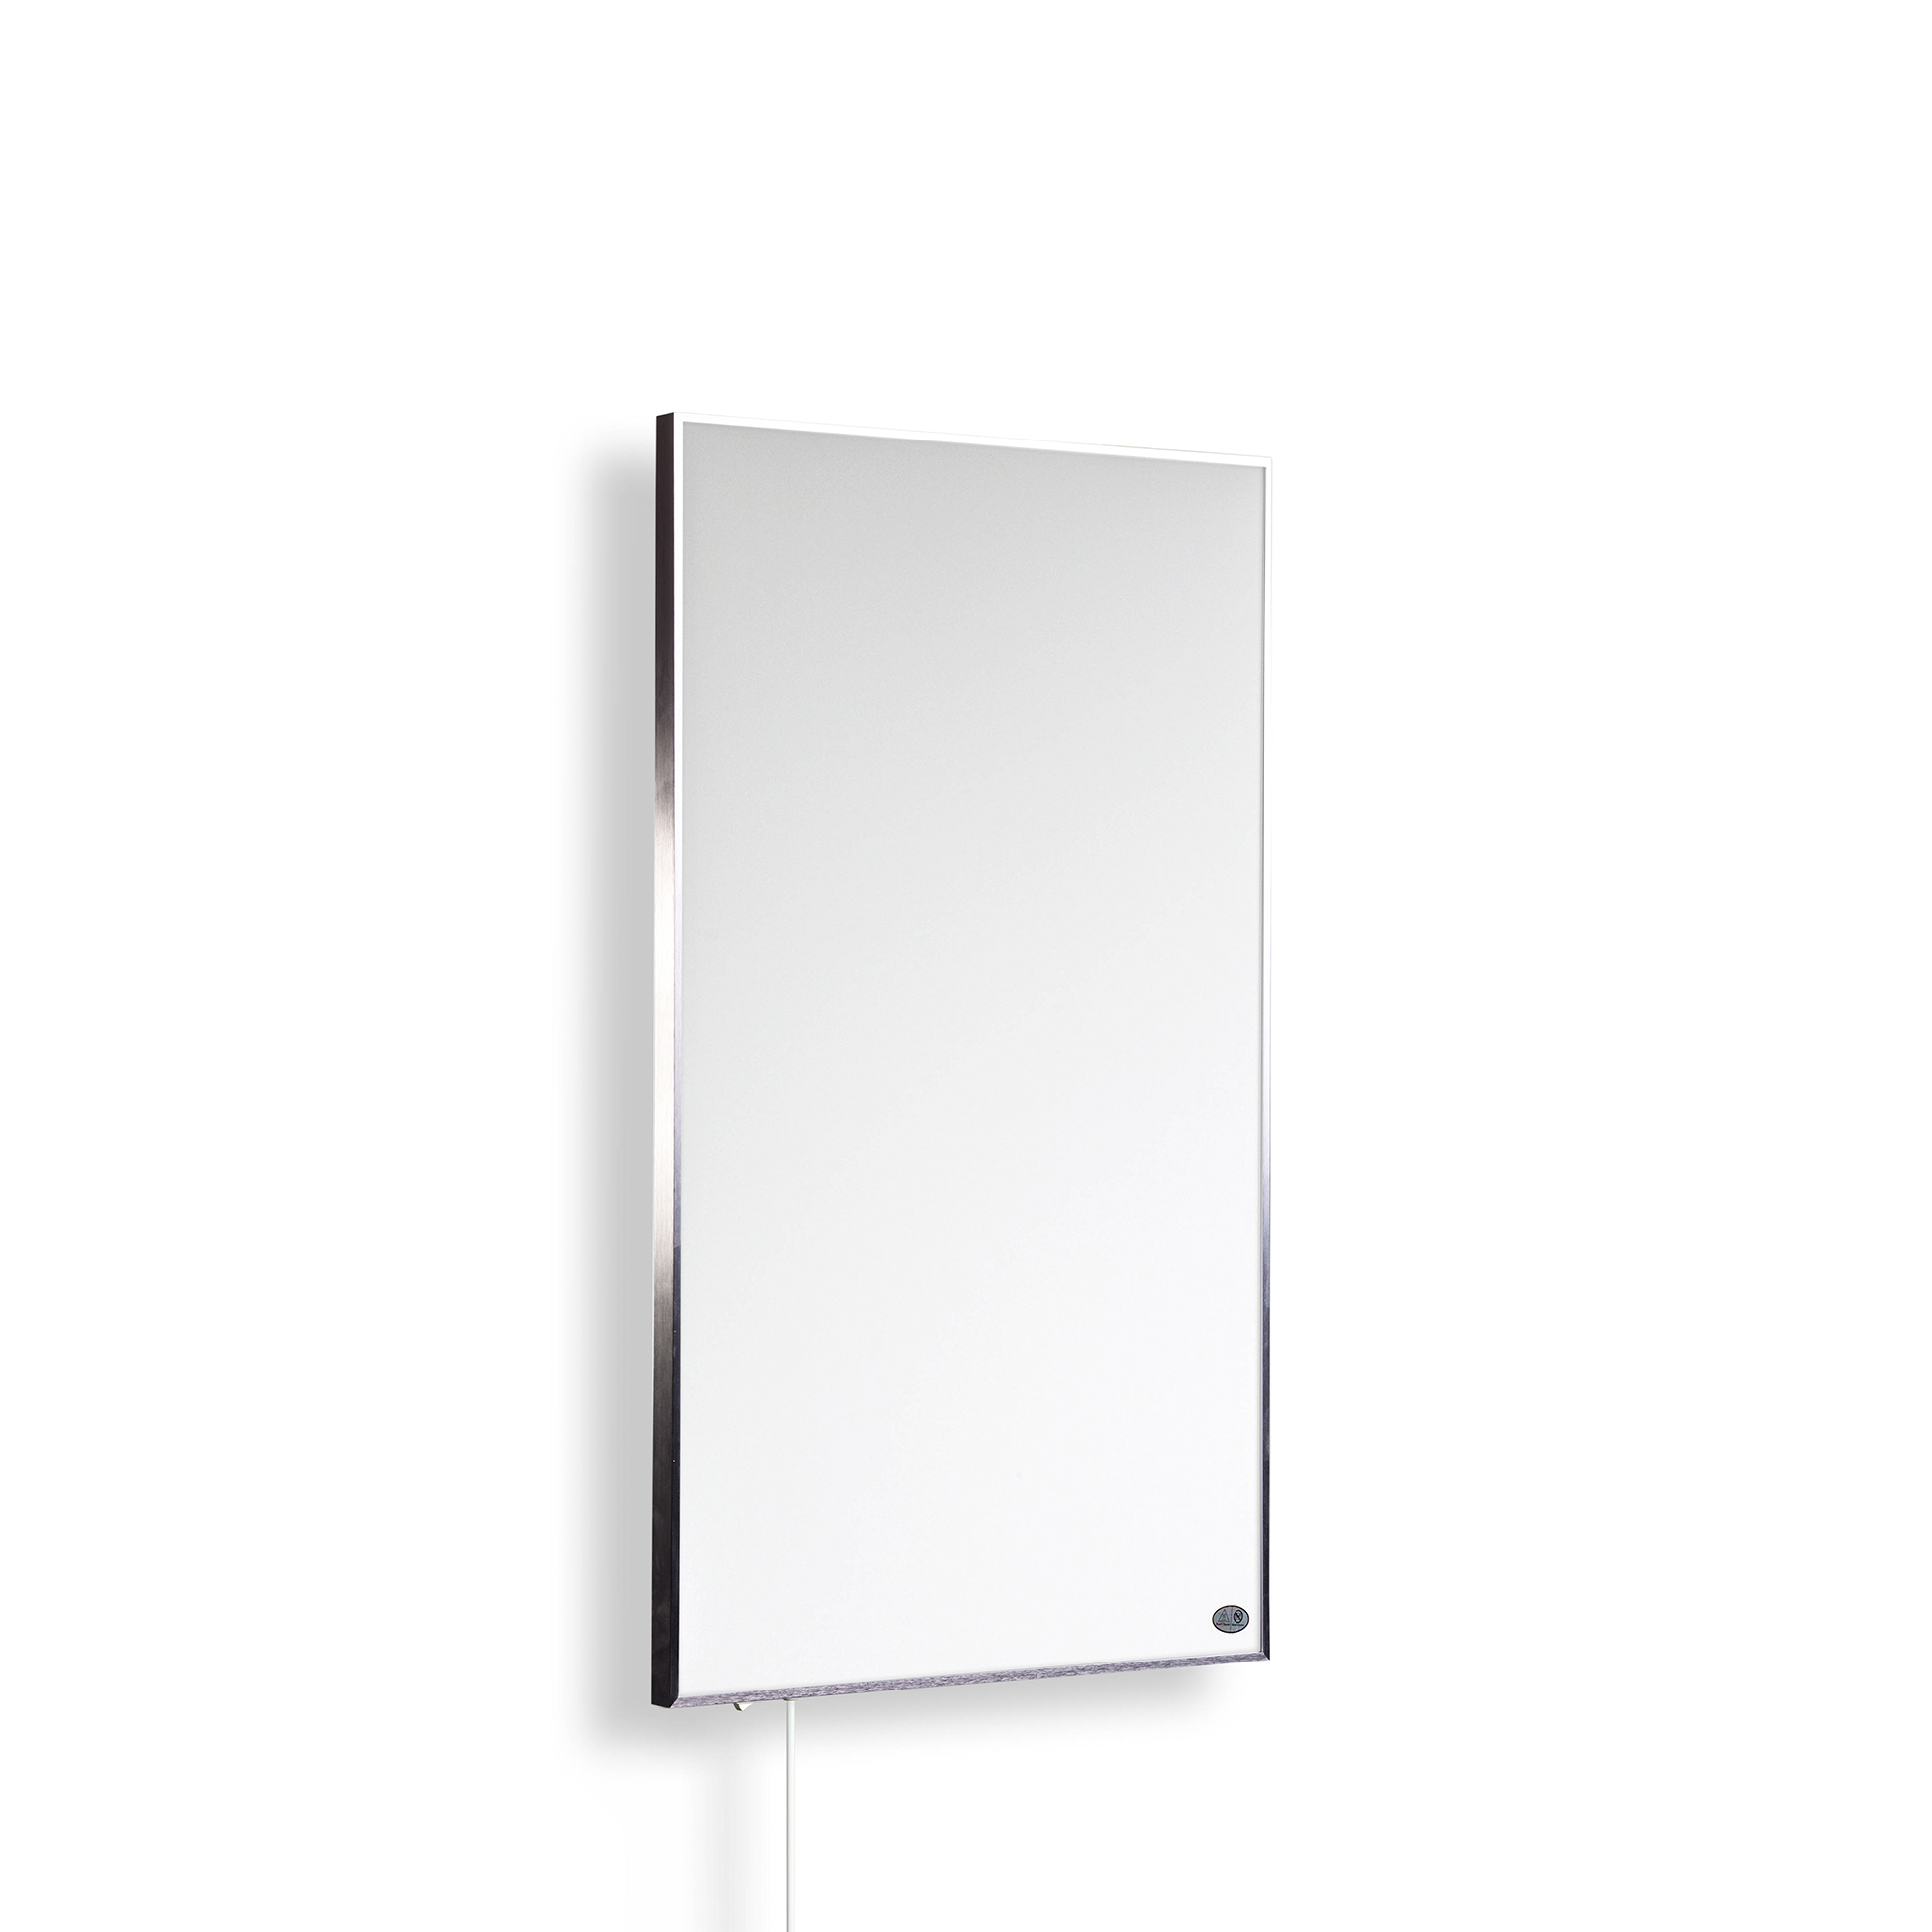 Infrarotheizung 'E-Serie' silbern 700 W + product picture